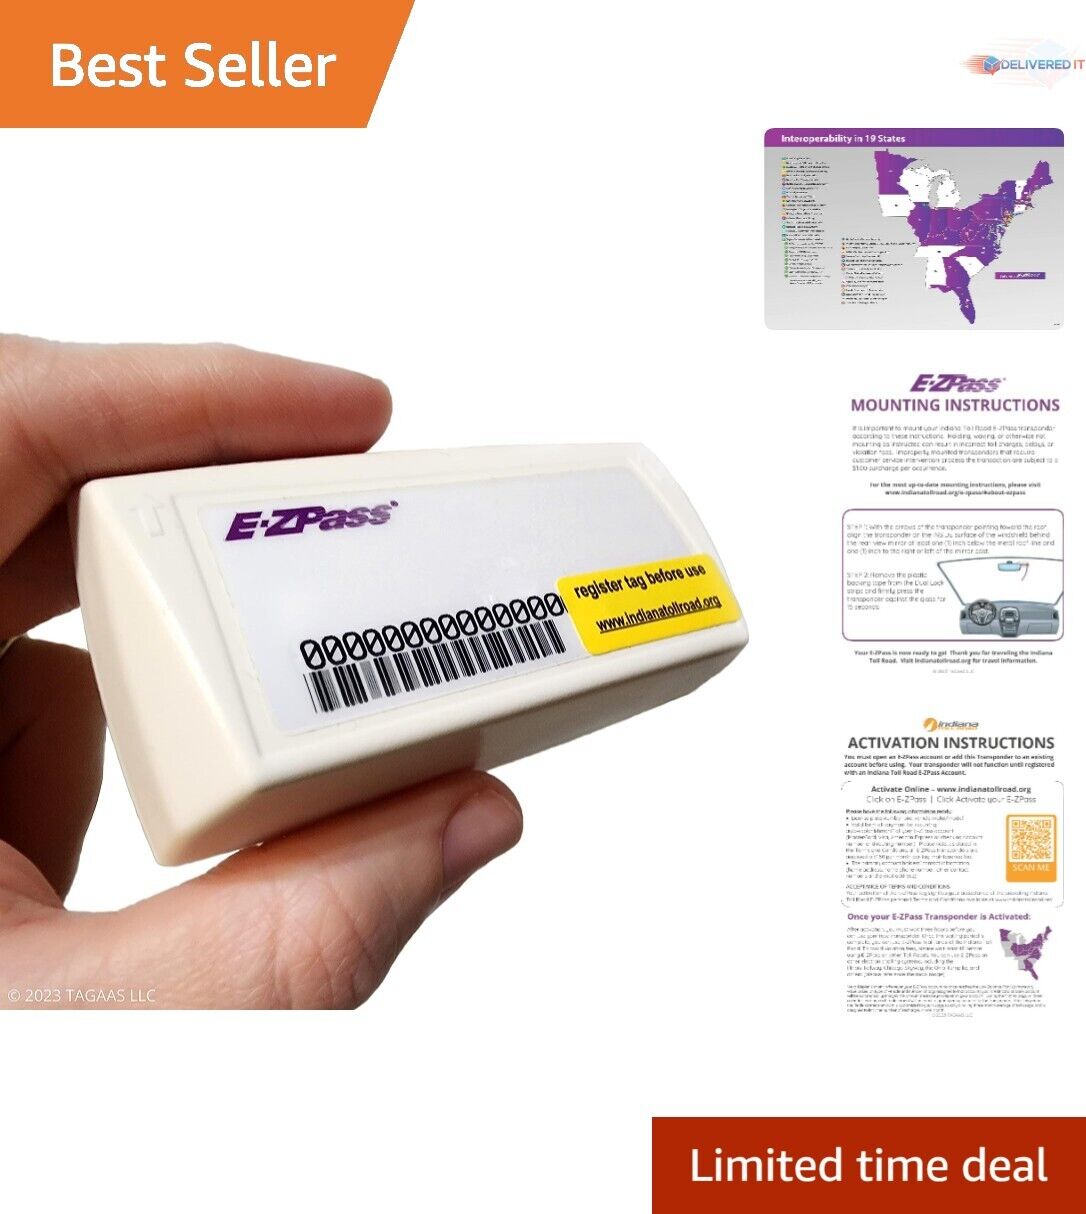 Easy-to-use Universal E-ZPass Transponder - Indiana Toll Road ITRCC 1-Pack